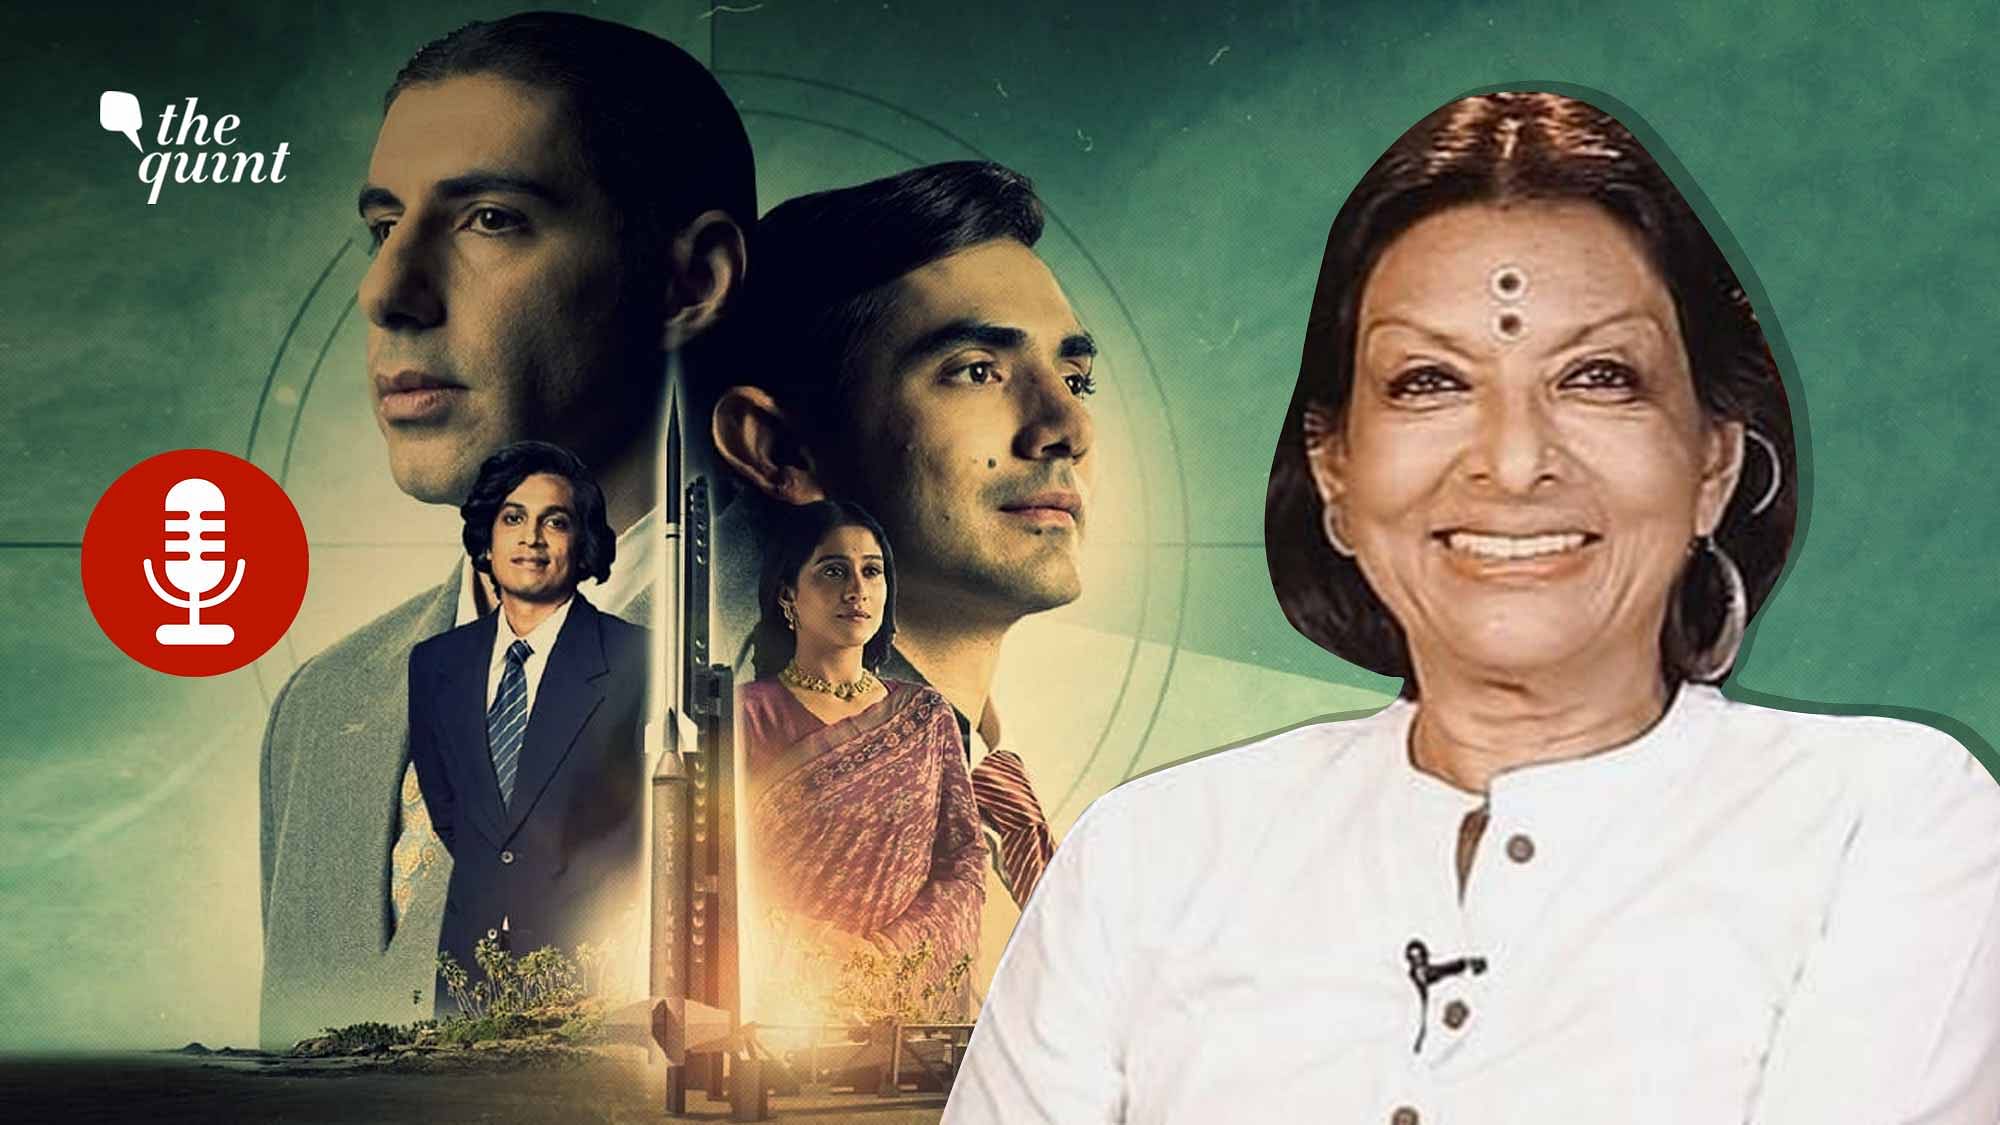 <div class="paragraphs"><p>Dr Mallika Sarabhai speaks to <strong>The Quint</strong> about the real stories behind the recently released show '<a href="https://www.thequint.com/entertainment/celebrities/entertainment/movie-reviews/rocket-boys-web-series-full-review-jim-sarbh-ishwak-singh-homi-bhabha-vikram-sarabhai" rel="nofollow">Rocket Boys</a>,' based on the lives of the Indian science pioneers Homi Bhabha and Vikram Sarabhai.</p></div>